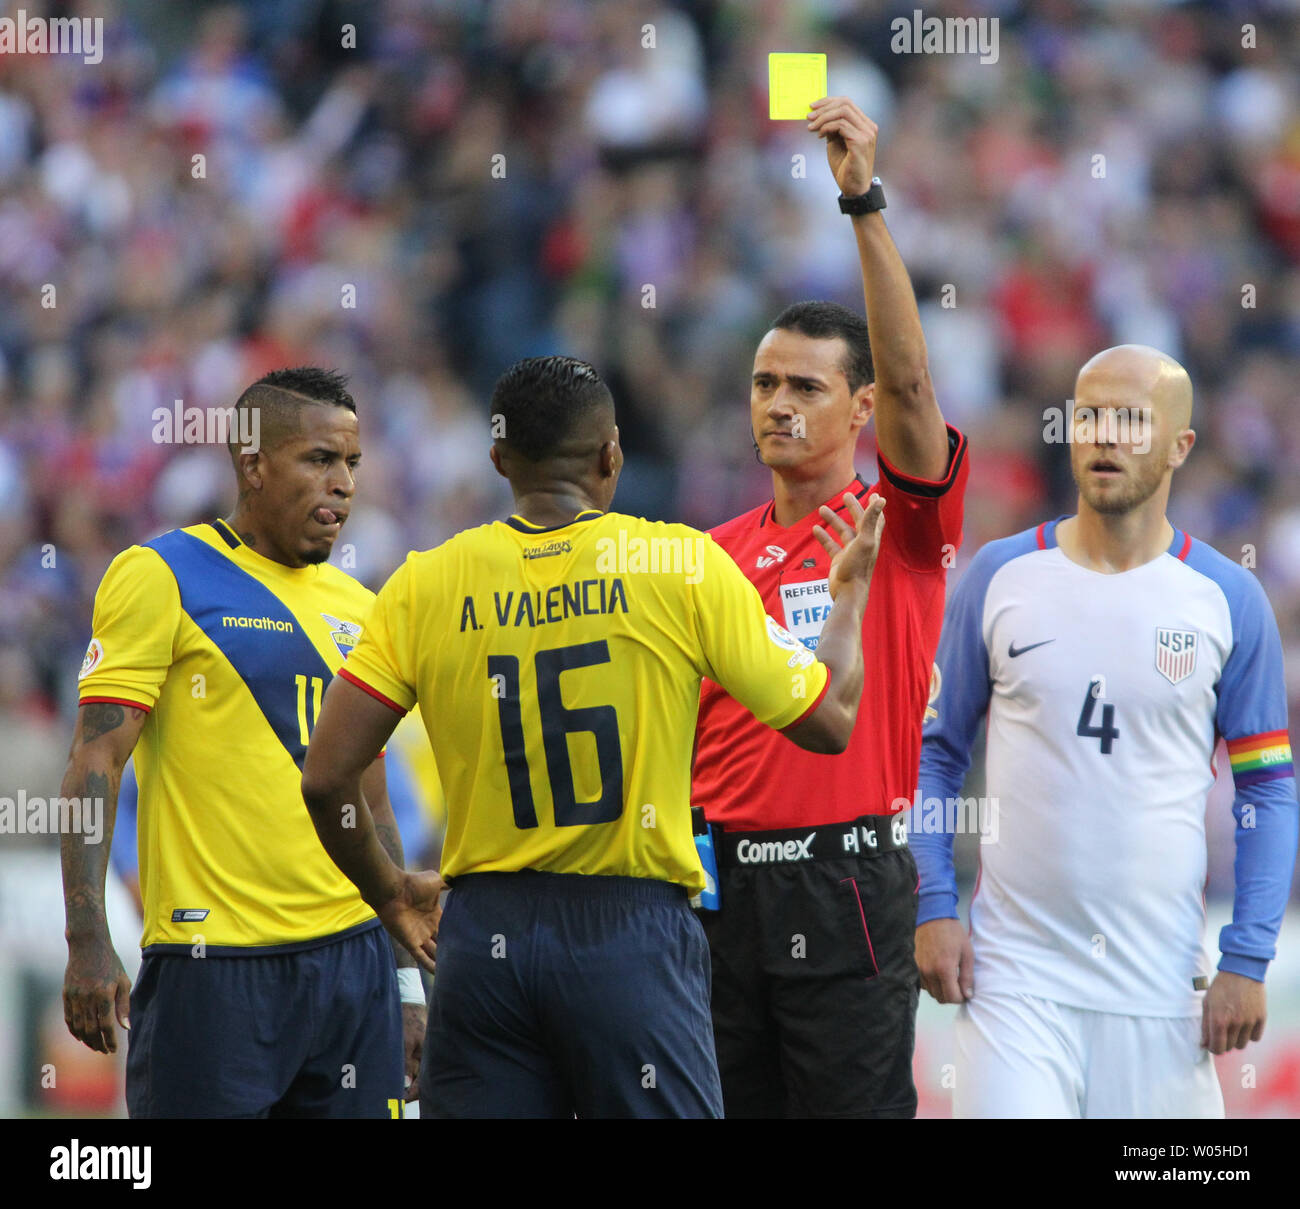 USA Ecuador's Antonio Valencia (16) receives a yellow card from Referee Wilmar Roldan during their game against USA in a 2016 Copa America Centenario soccer quarterfinals at CenturyLink Field in Seattle, Washington on June 16, 2016.     USA beat Ecuador 2-1 to advance to the semi-finals.    Photo by Jim Bryant/ UPI Stock Photo